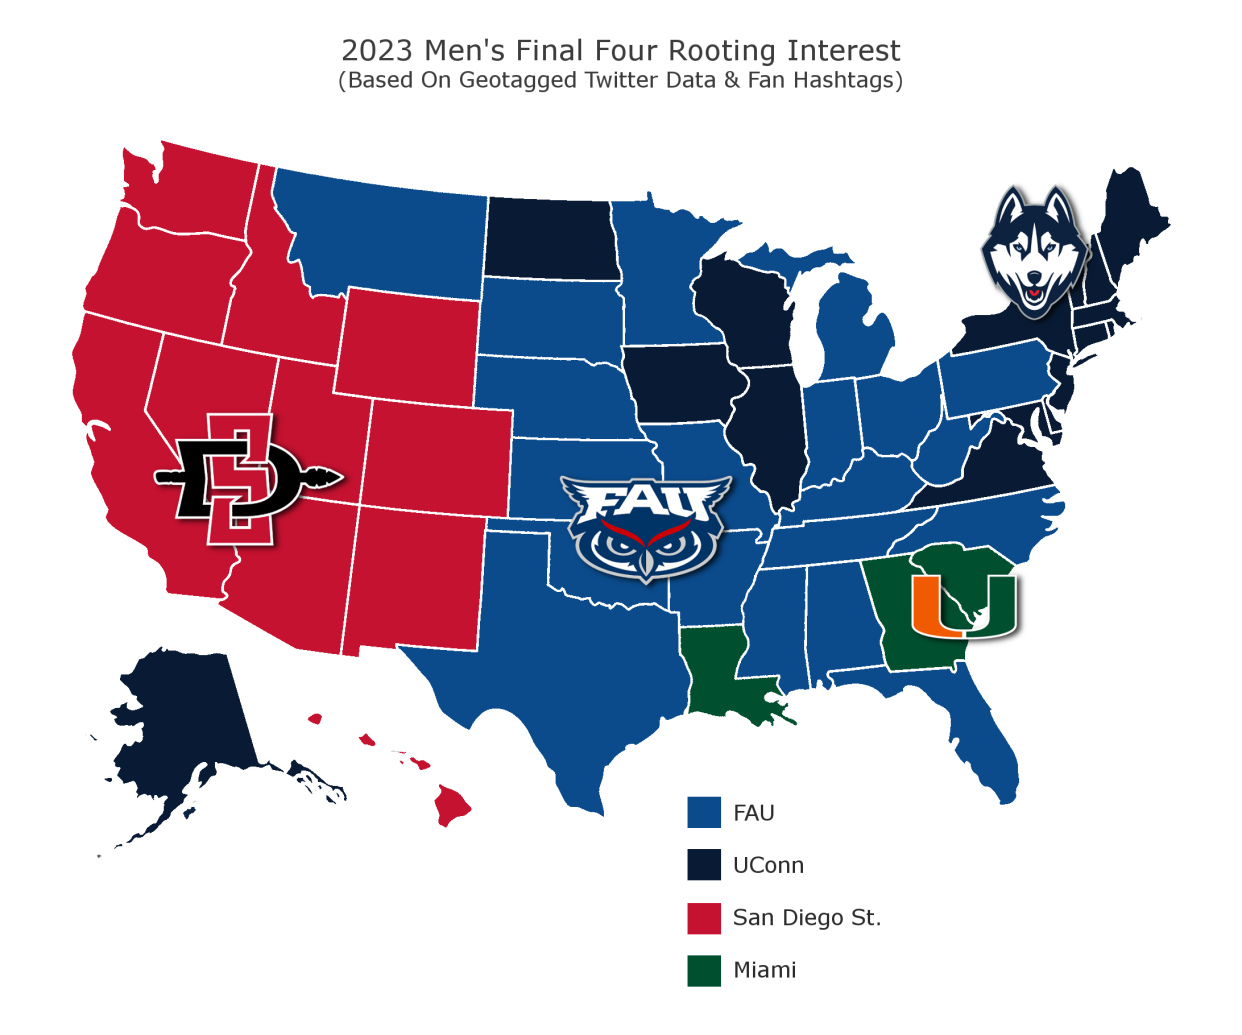 Map showing Men's Final Four rooting interests.